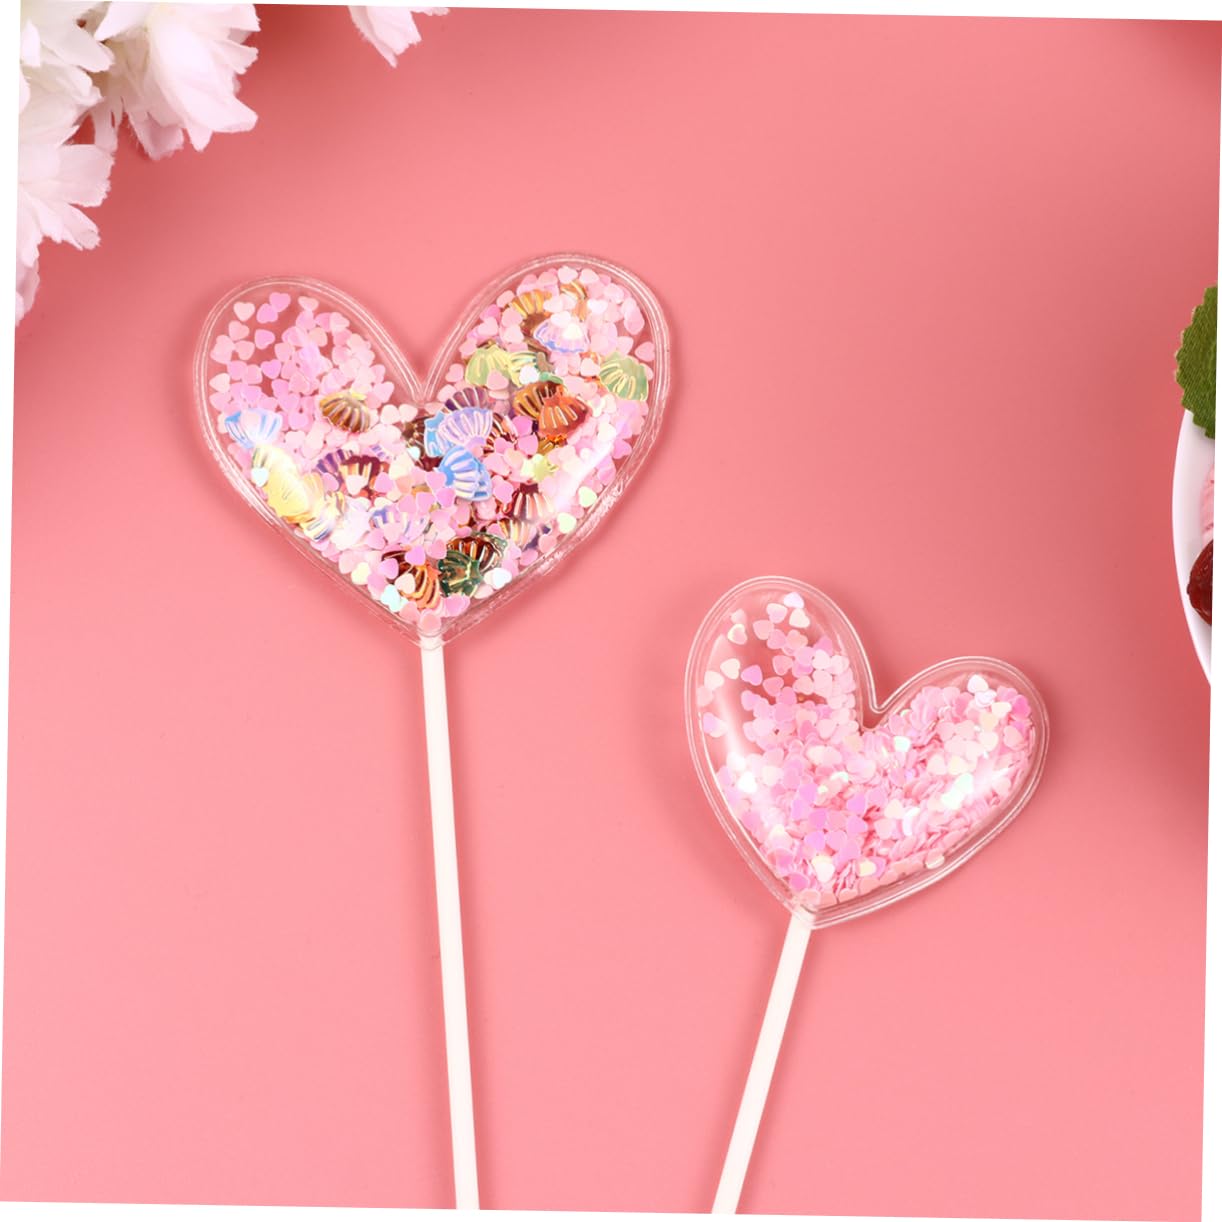 8pcs Birthday Baby Wall Grid Accessories The Wedding Party Cute Cake Picks Women Finger Watch Cakes Confetti Star Shape Heart Shower Good Mood Decor Cake Toppers Paper Cup Love